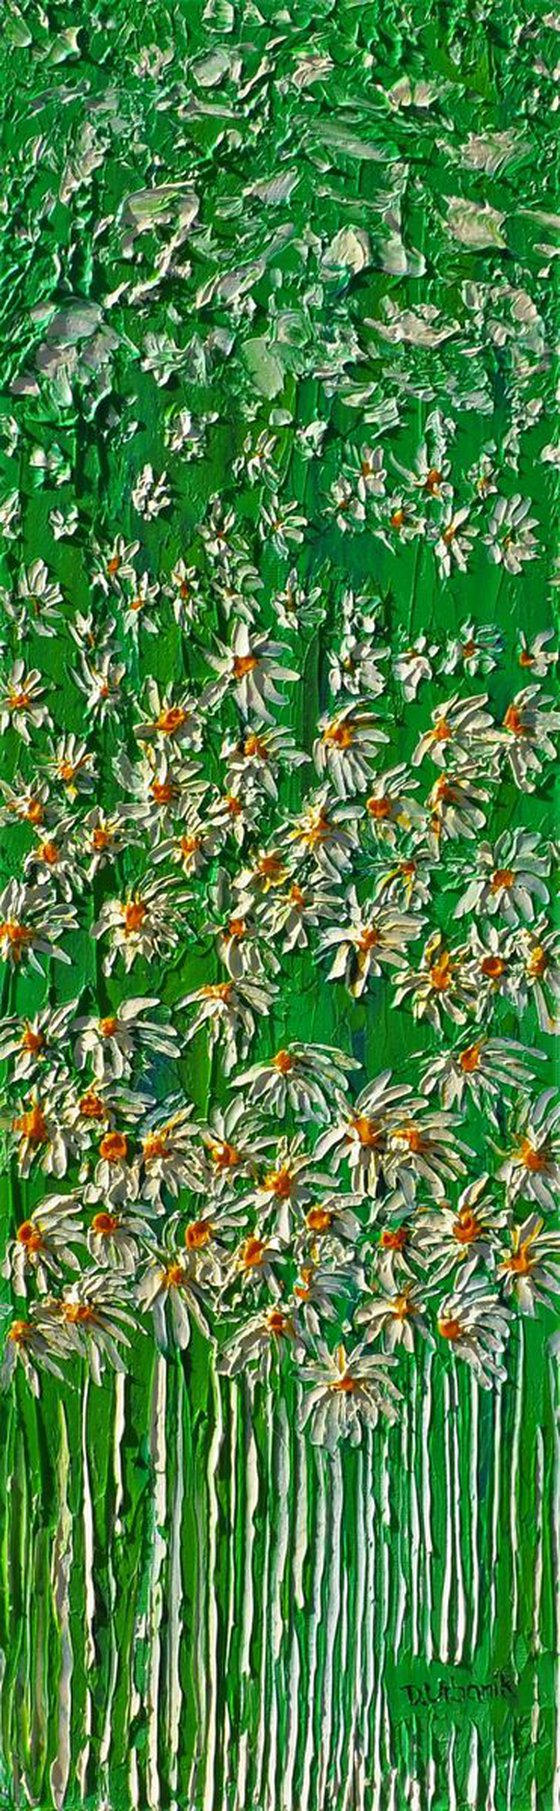 Daisies In The Grass 2